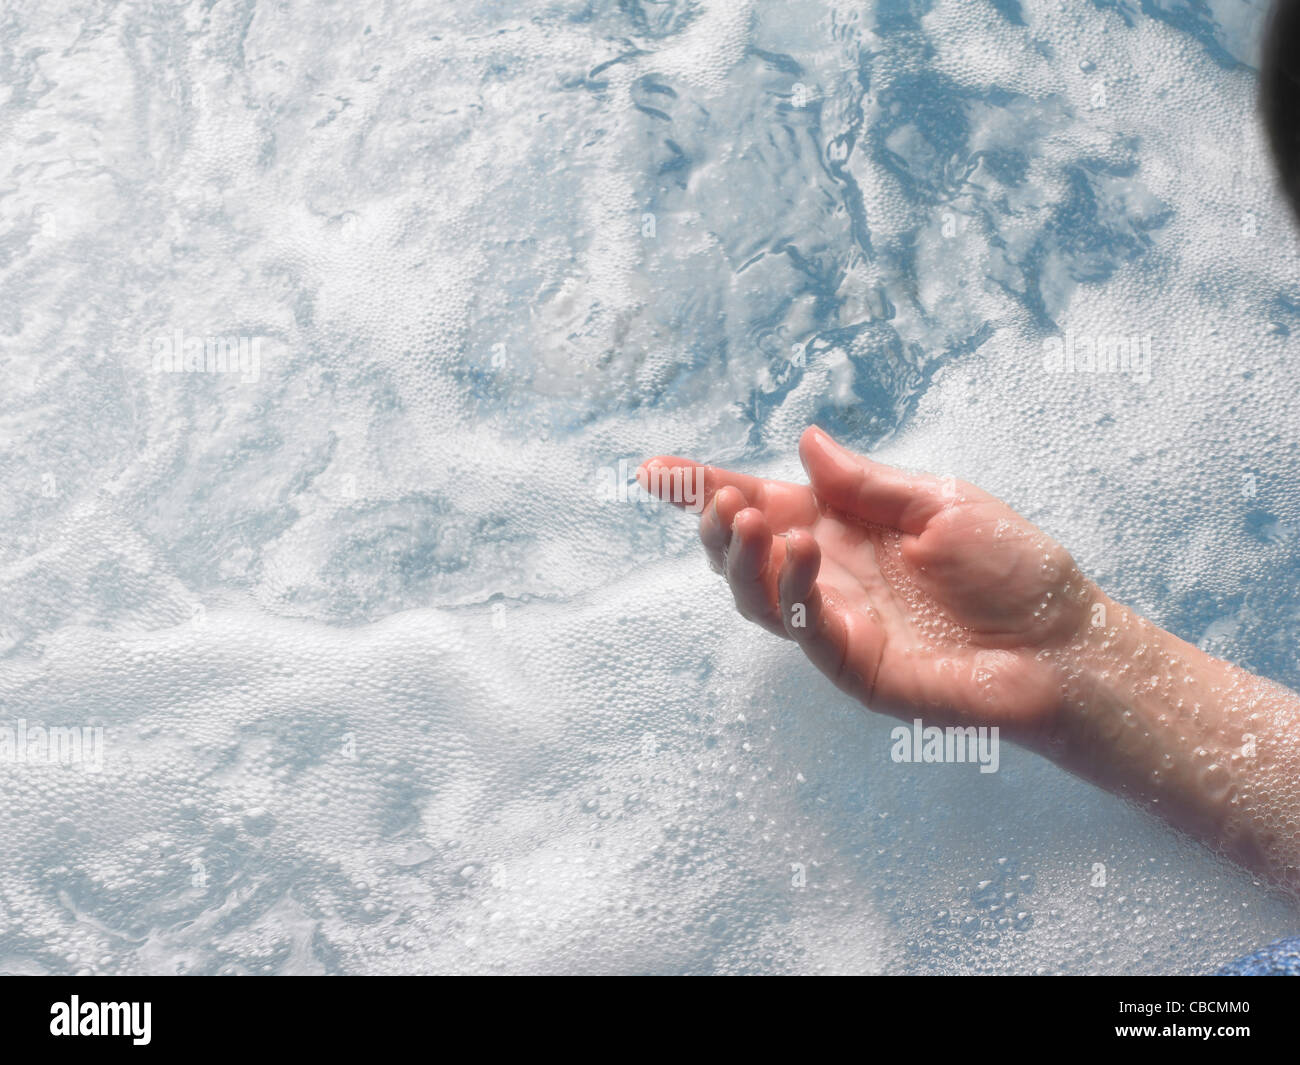 Female hand in spa water Stock Photo